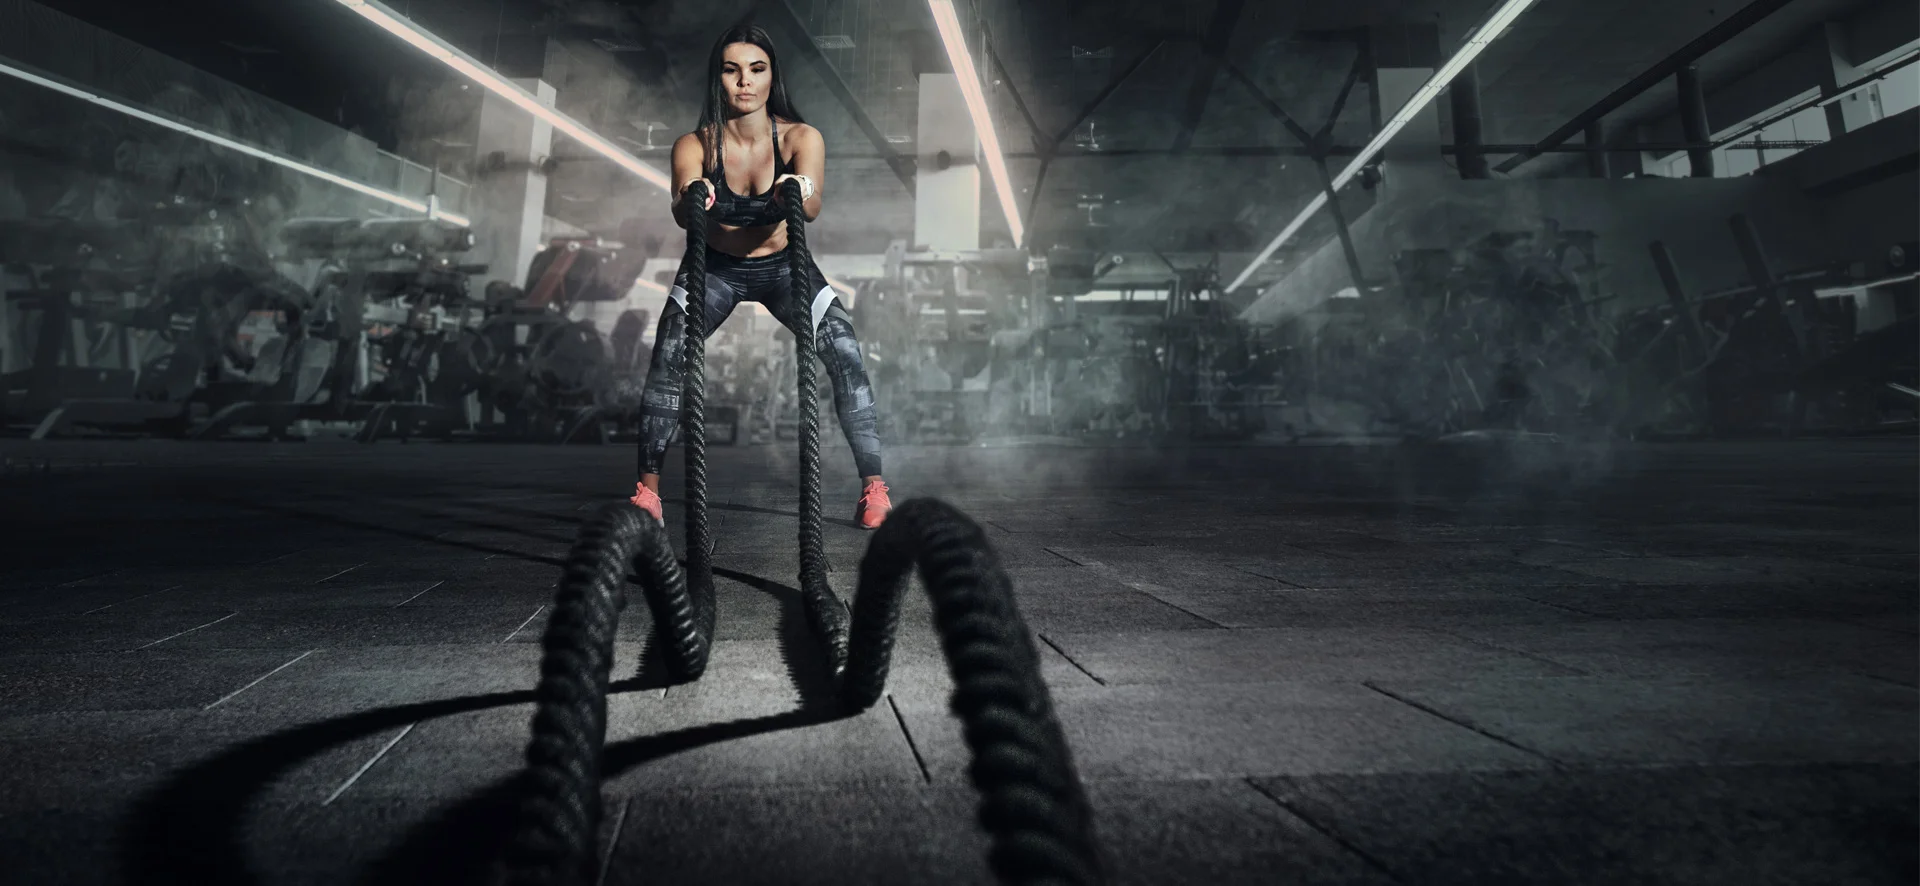 A rejuvenated woman training with battle ropes